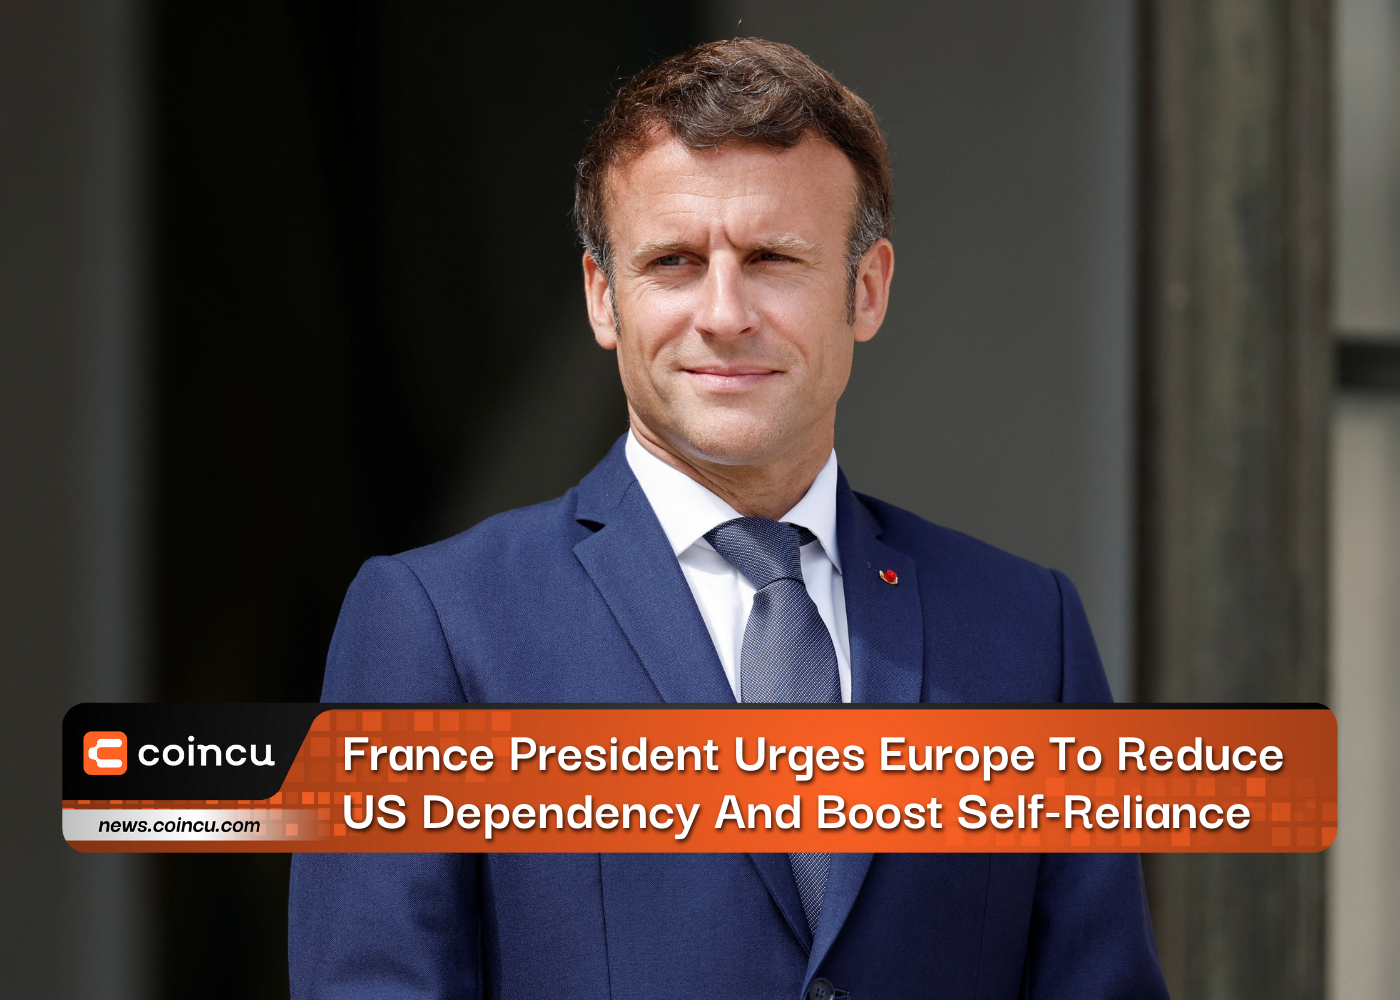 France President Urges Europe To Reduce US Dependency And Boost Self-Reliance